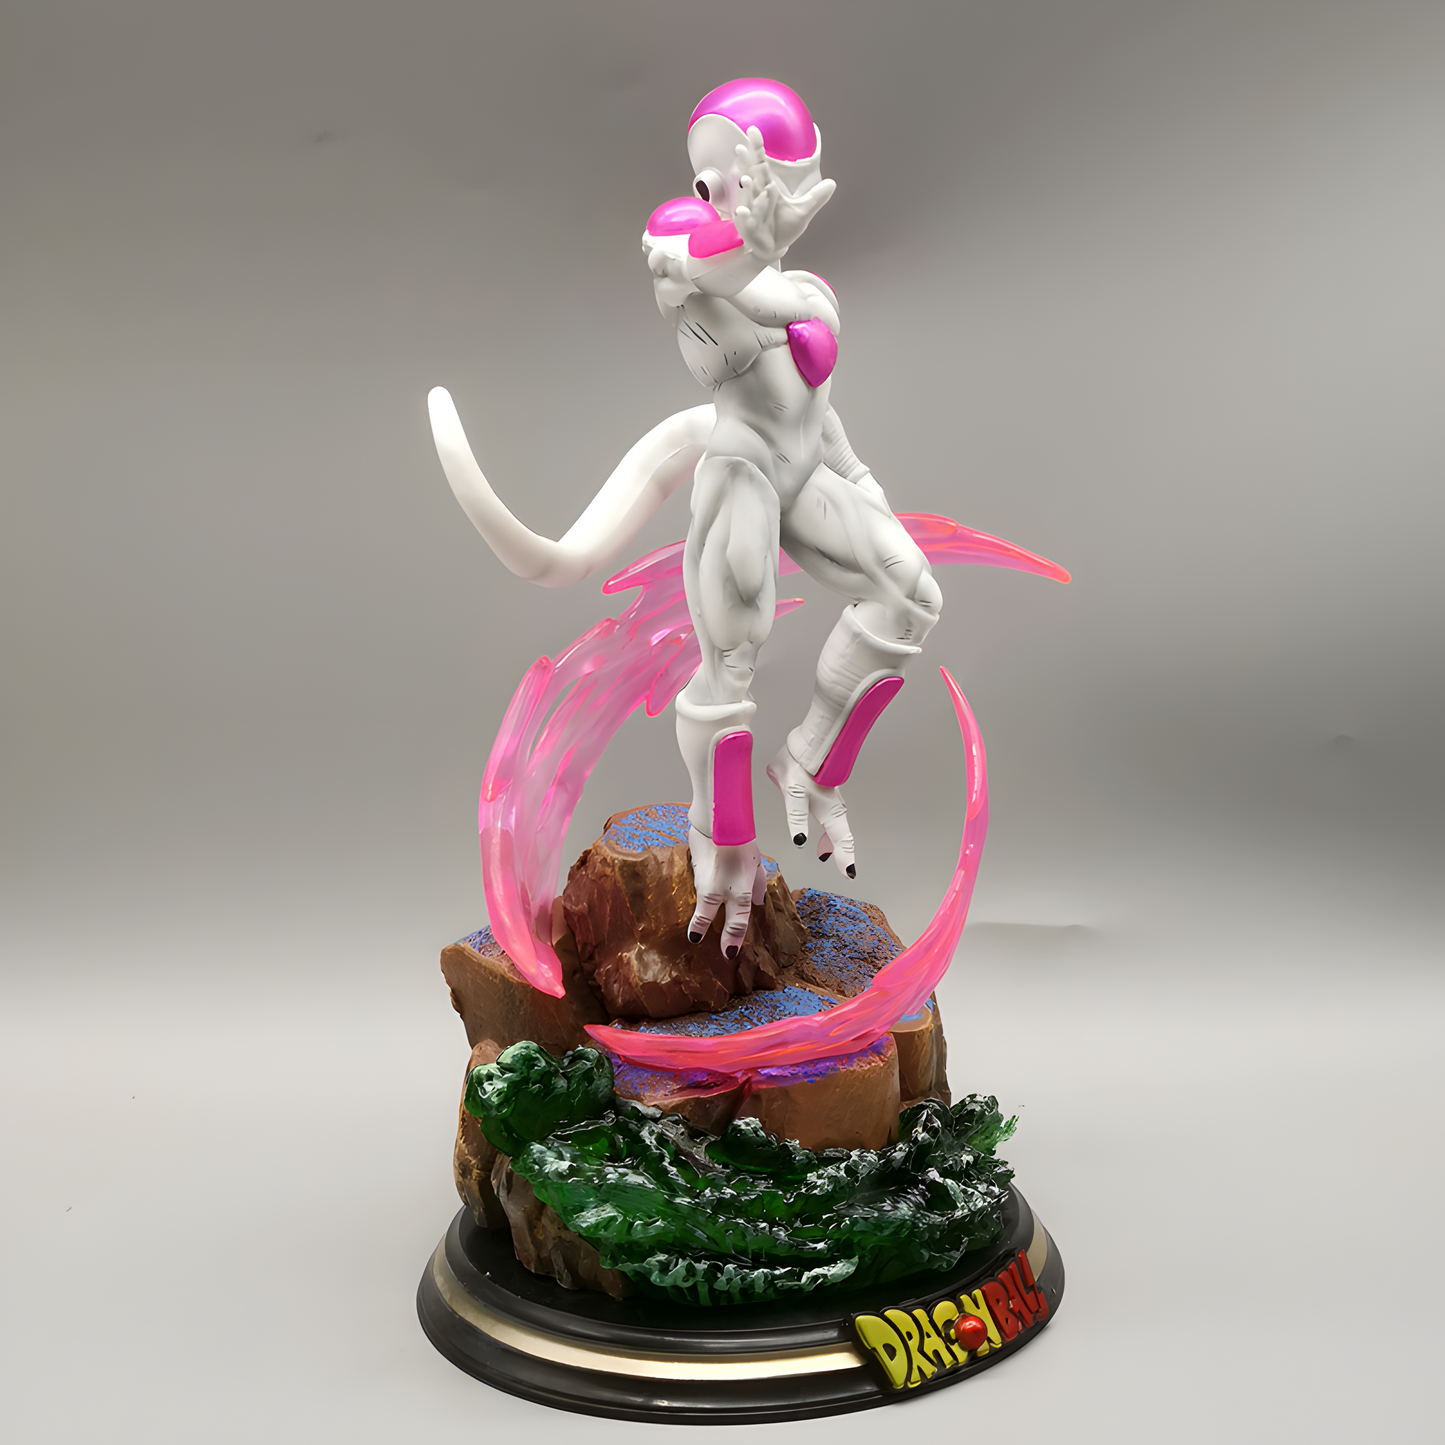 Iconic Frieza figure from Dragon Ball, poised elegantly atop a rocky base enveloped by his trademark pink energy whirl, set against a studio background.